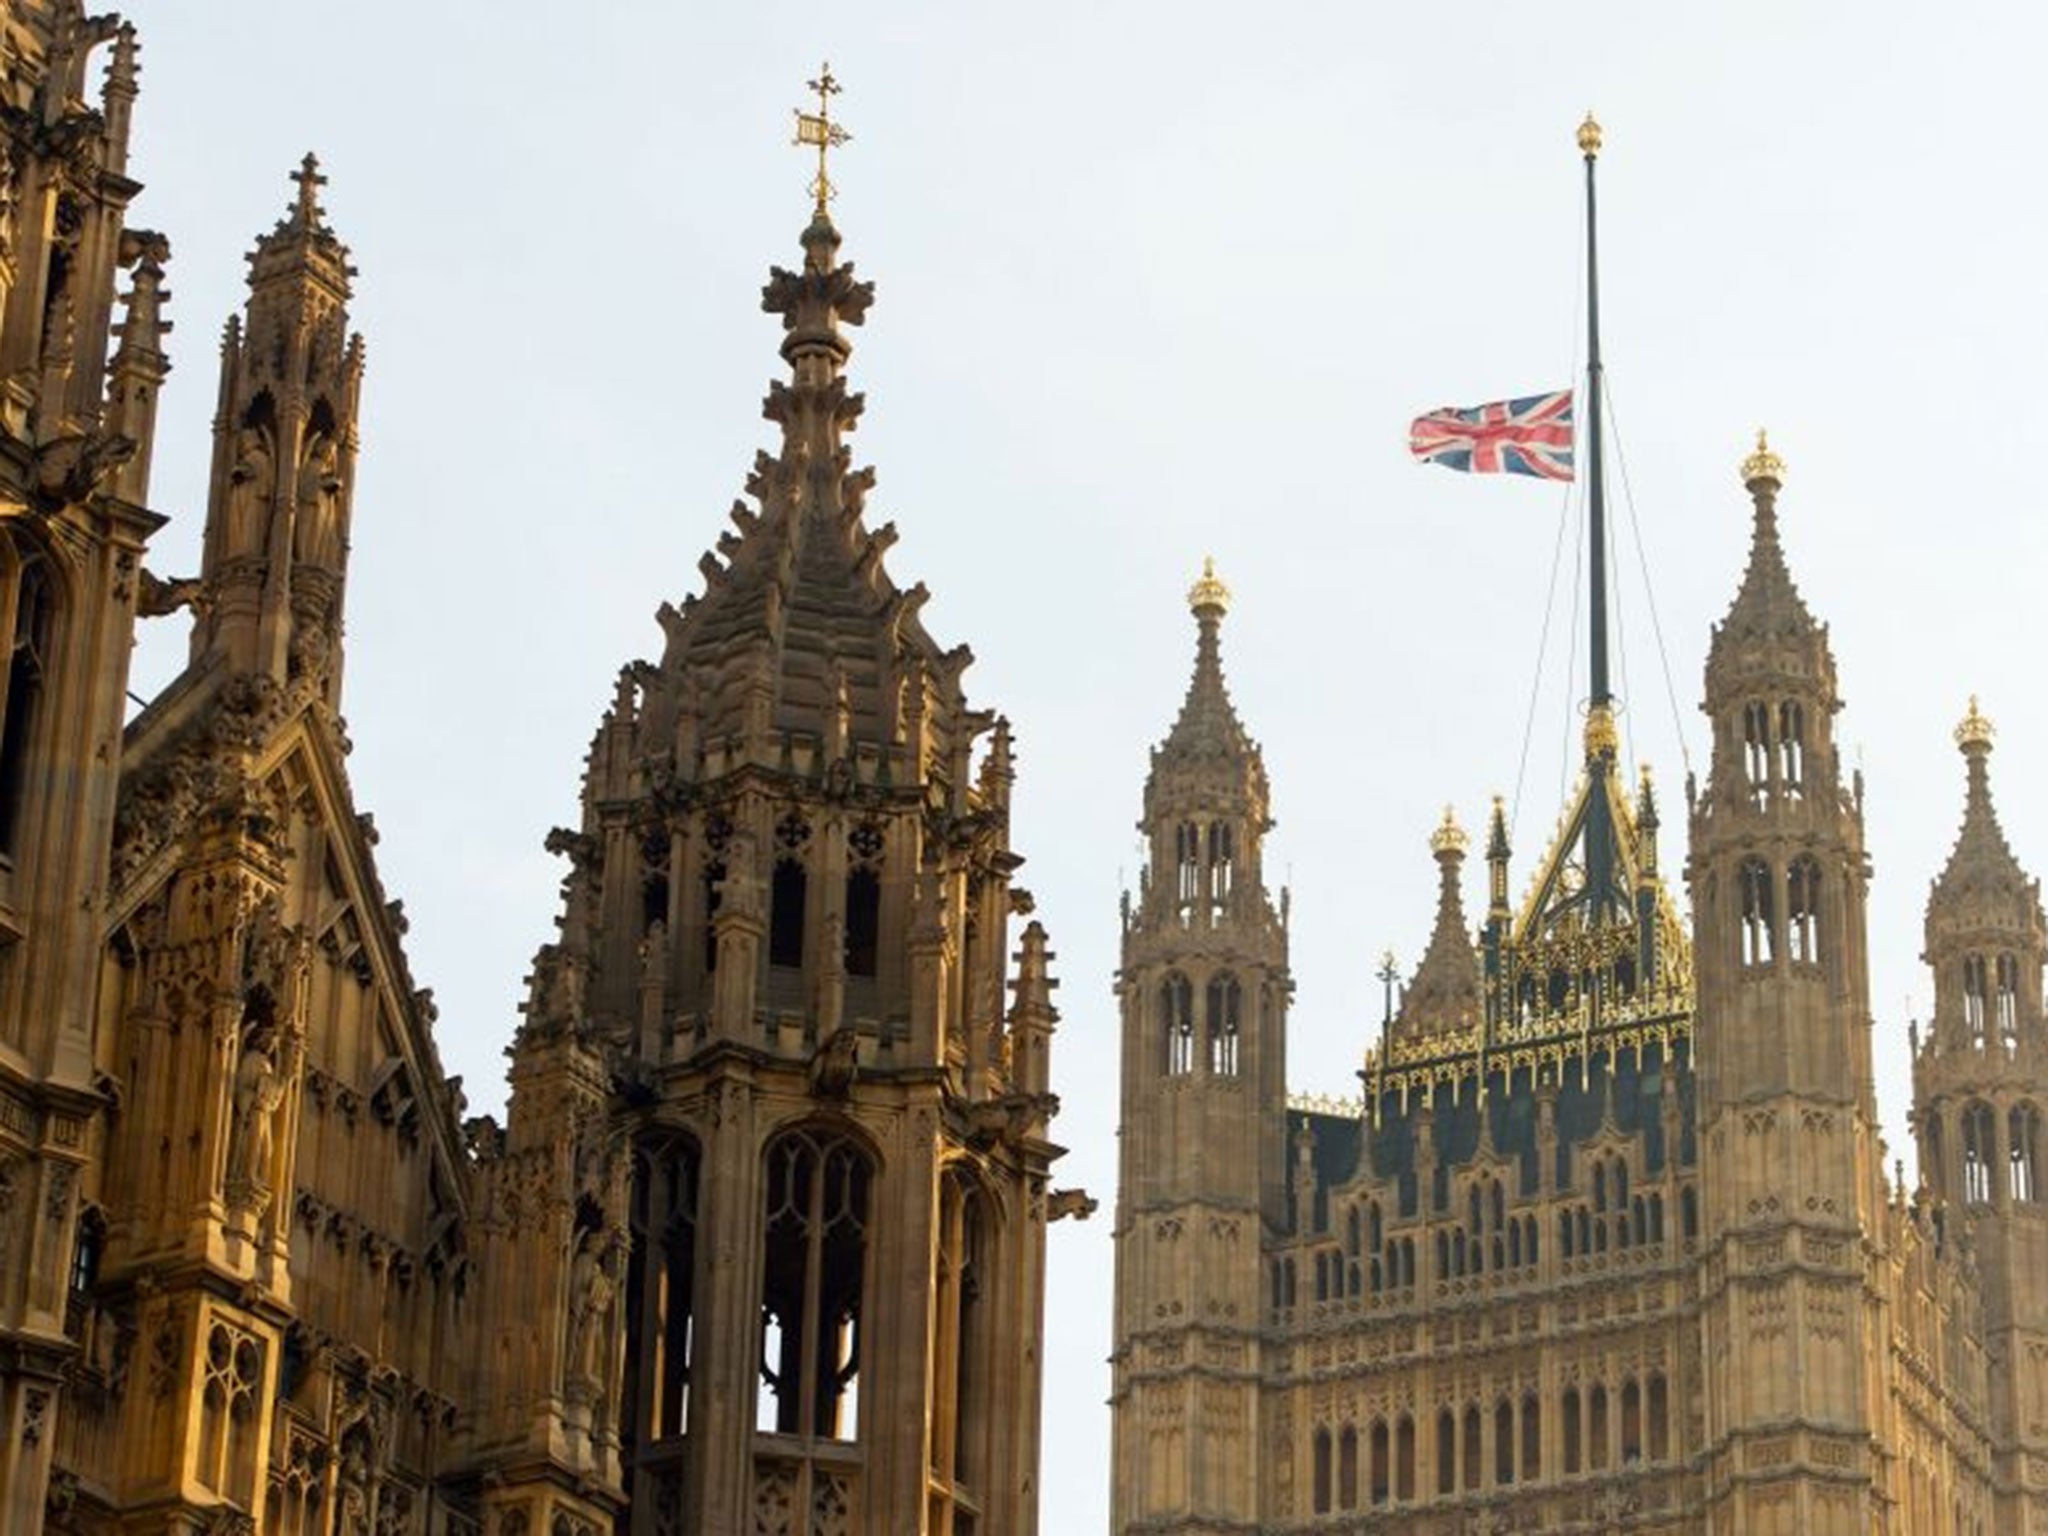 The flag at the Houses of Parliament, London, flies at half mast as a mark of respect for King Abdullah of Saudi Arabia, whose death was announced last night. 